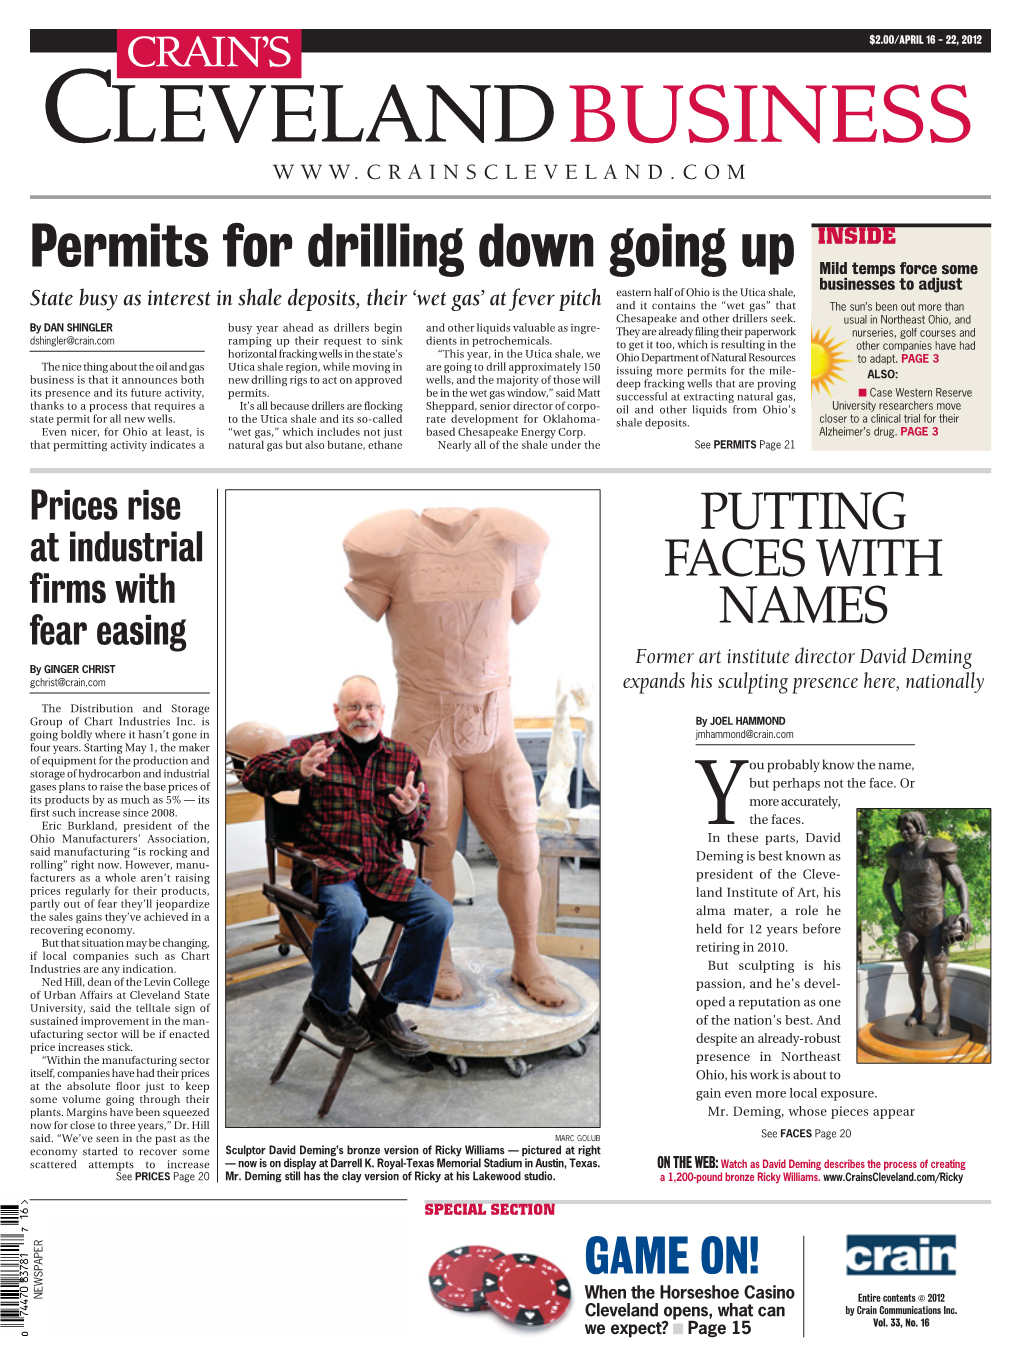 Permits for Drilling Down Going Up